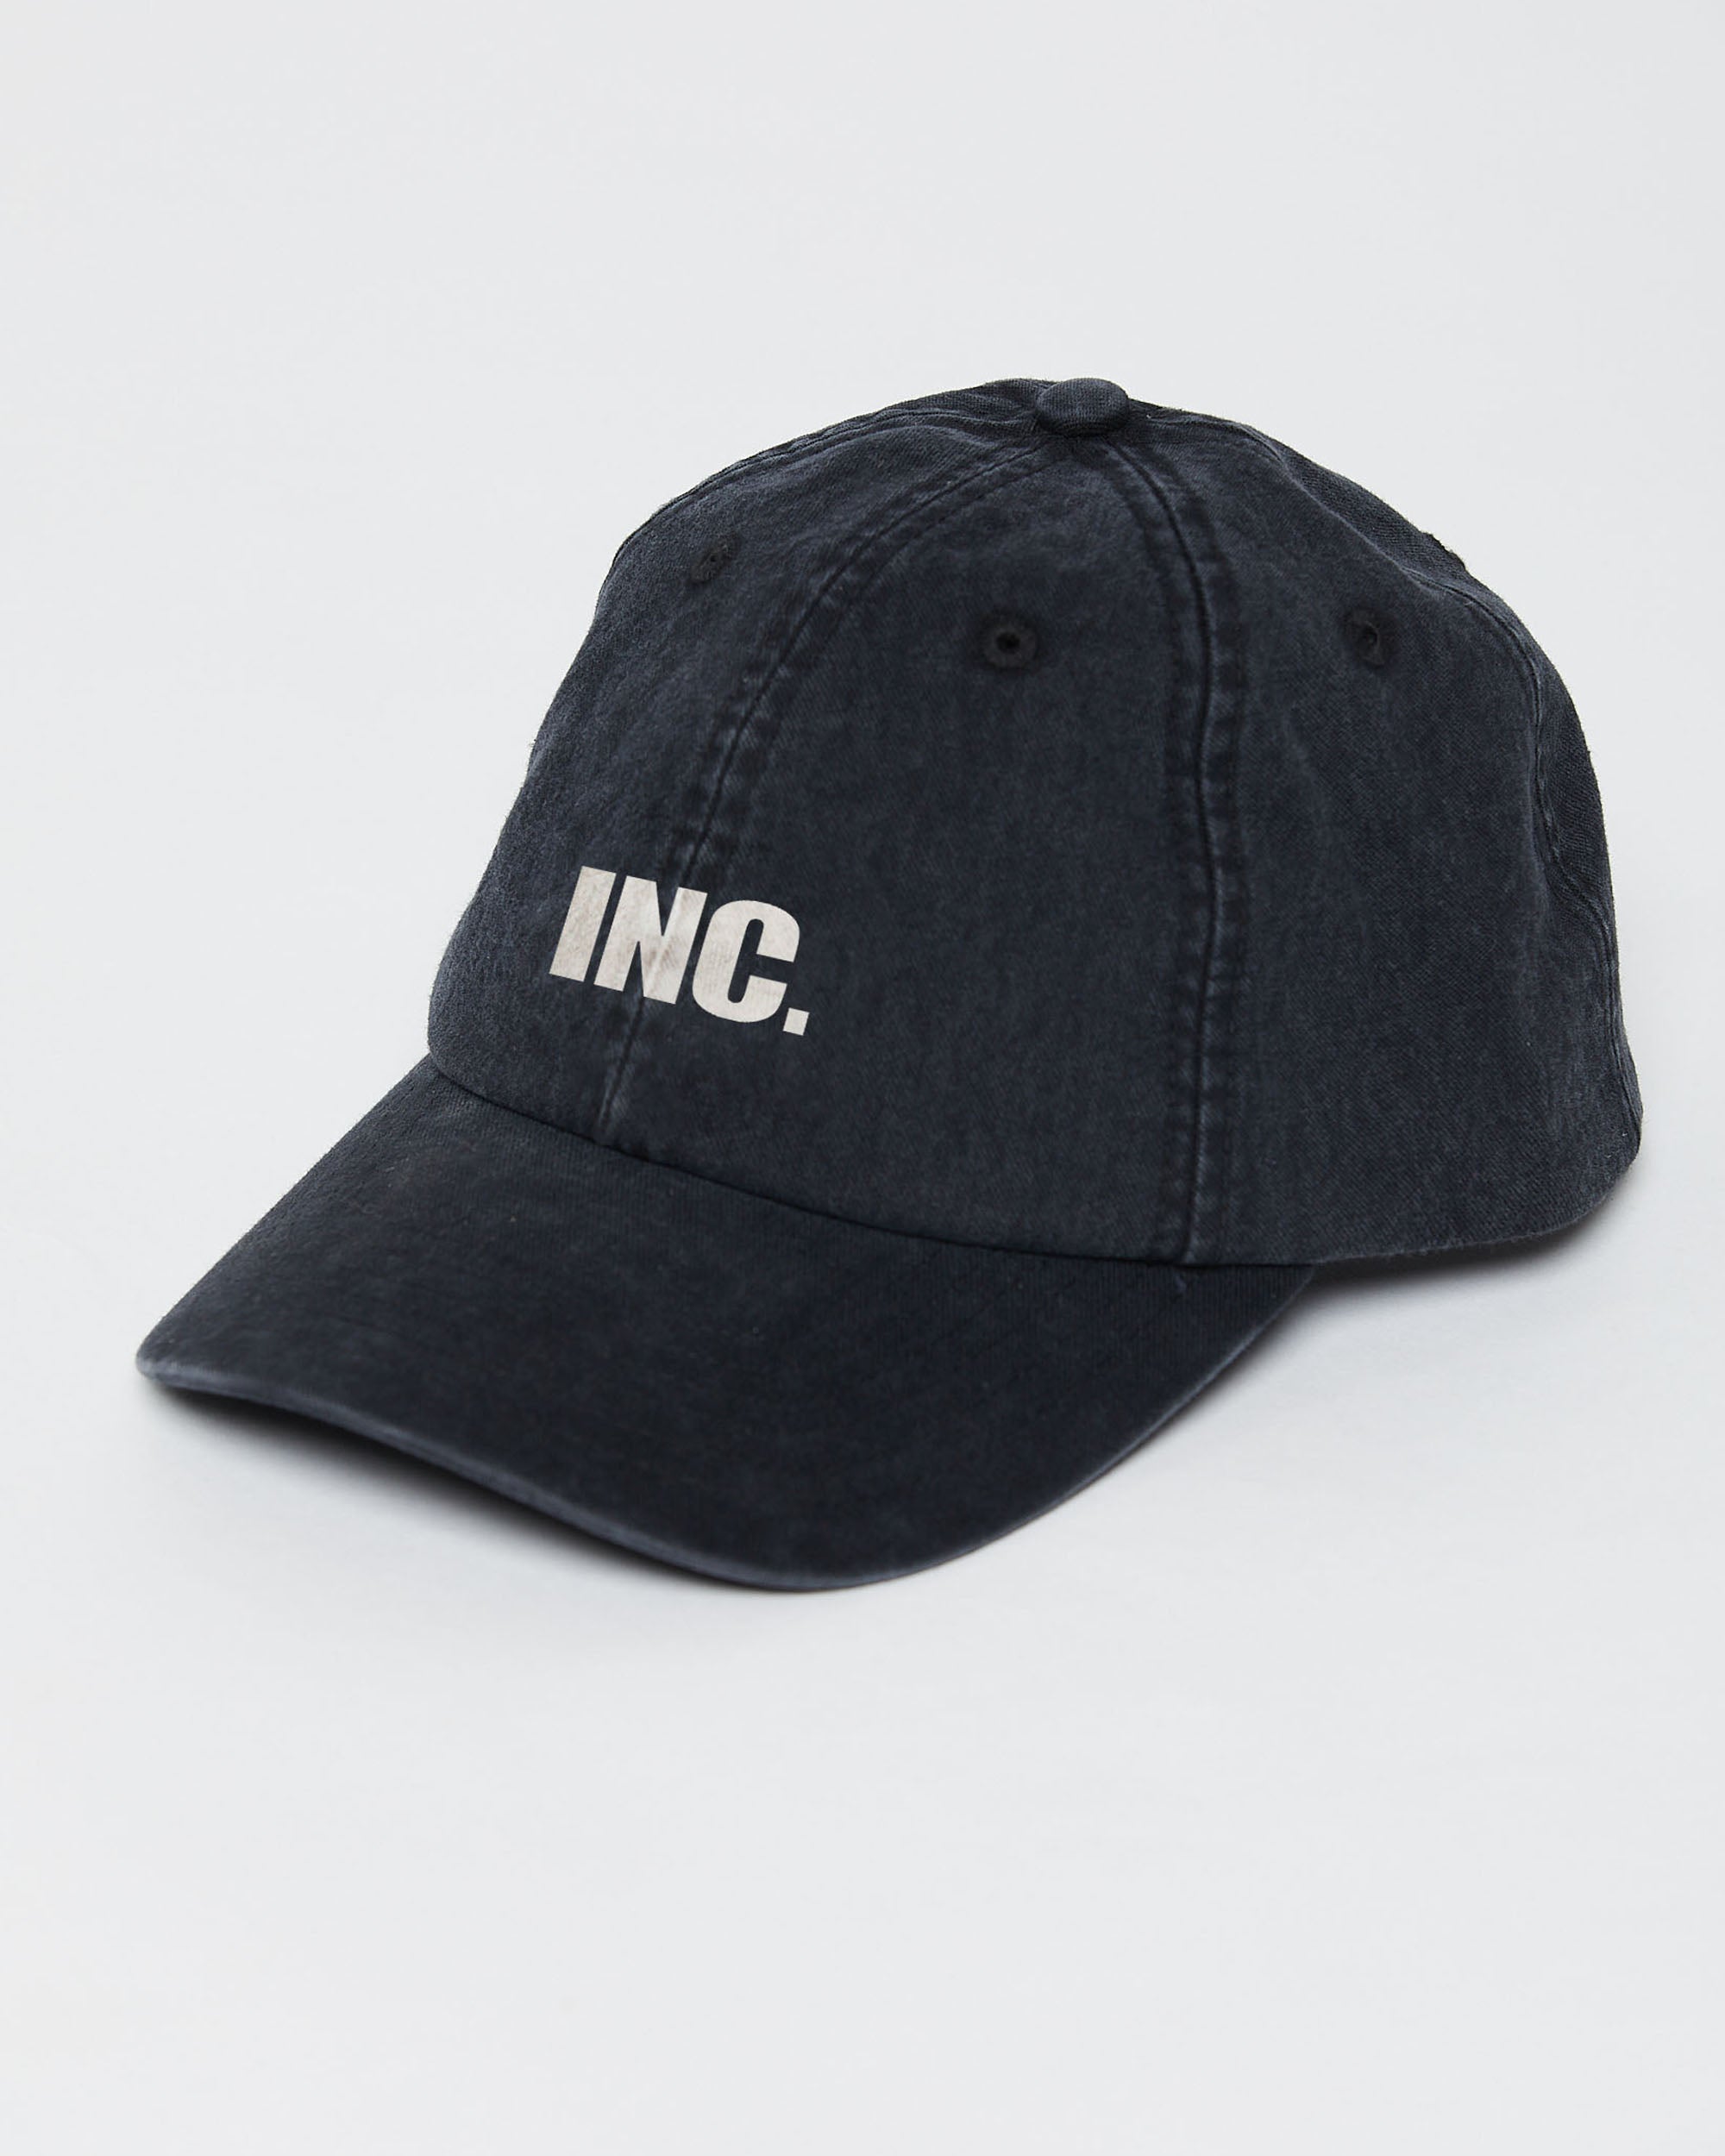 The Dad Cap - Washed Black